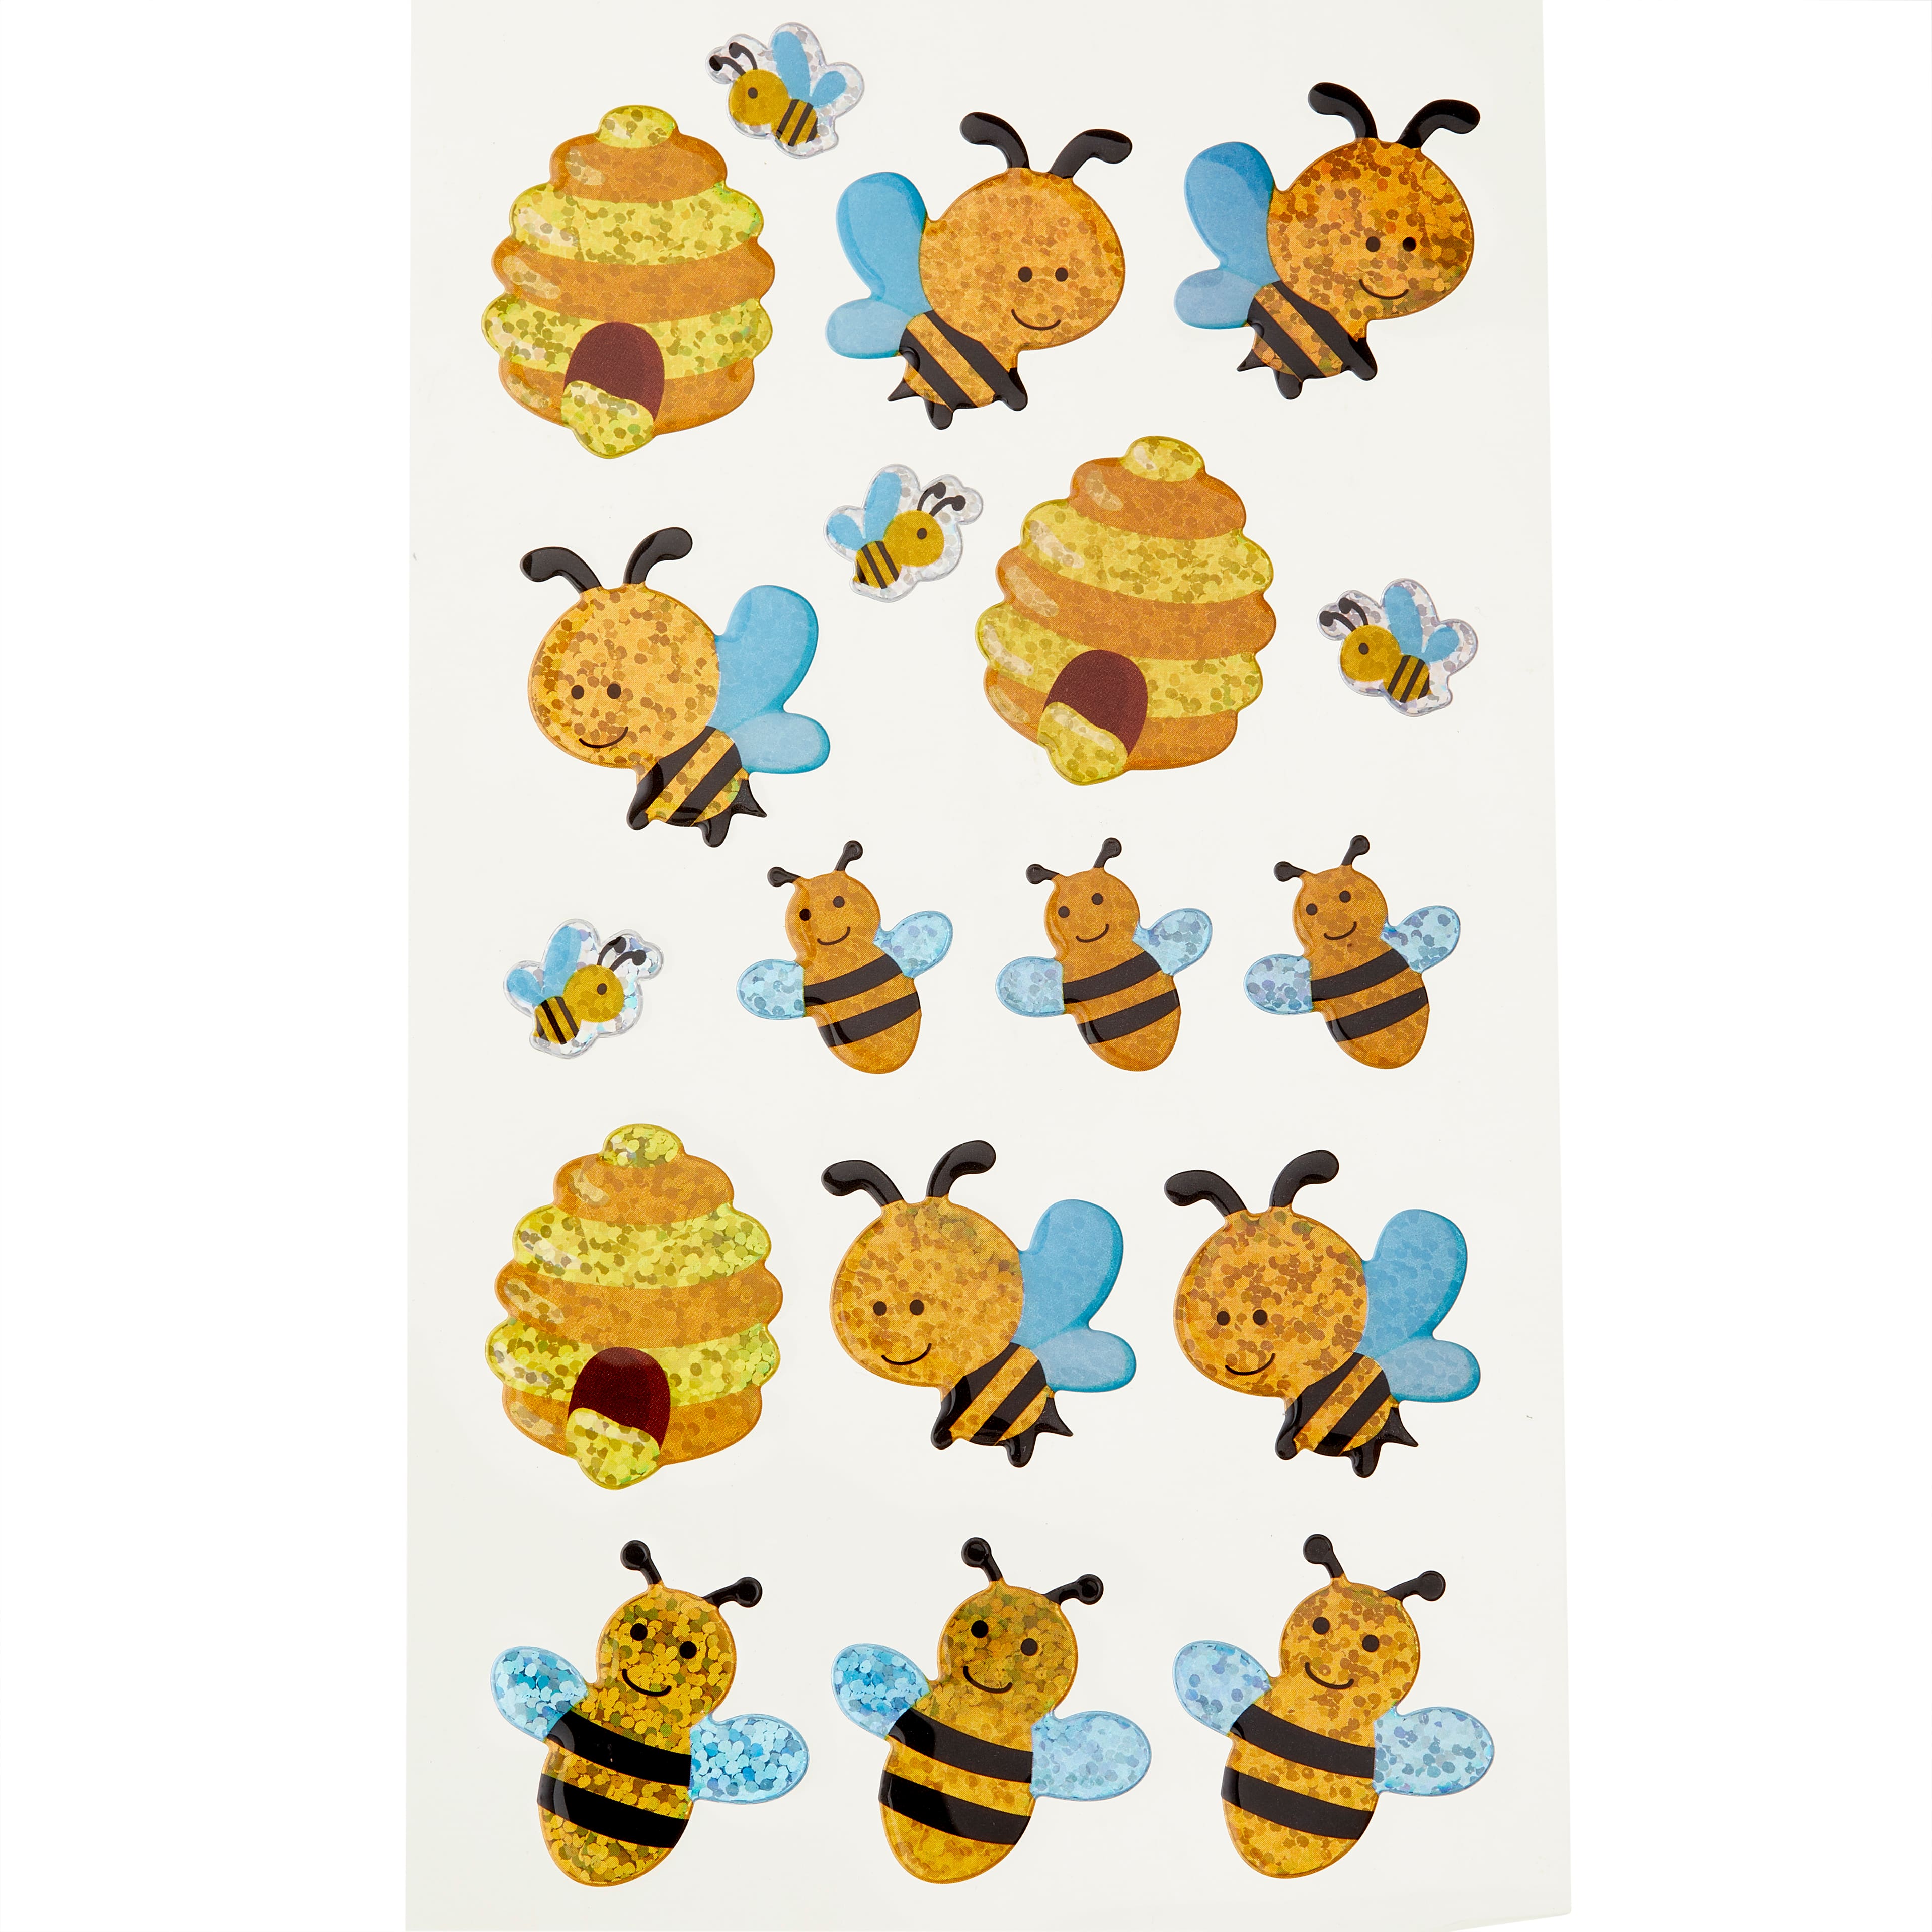 Bumble Bee Sticker - Stitched Up Stickers